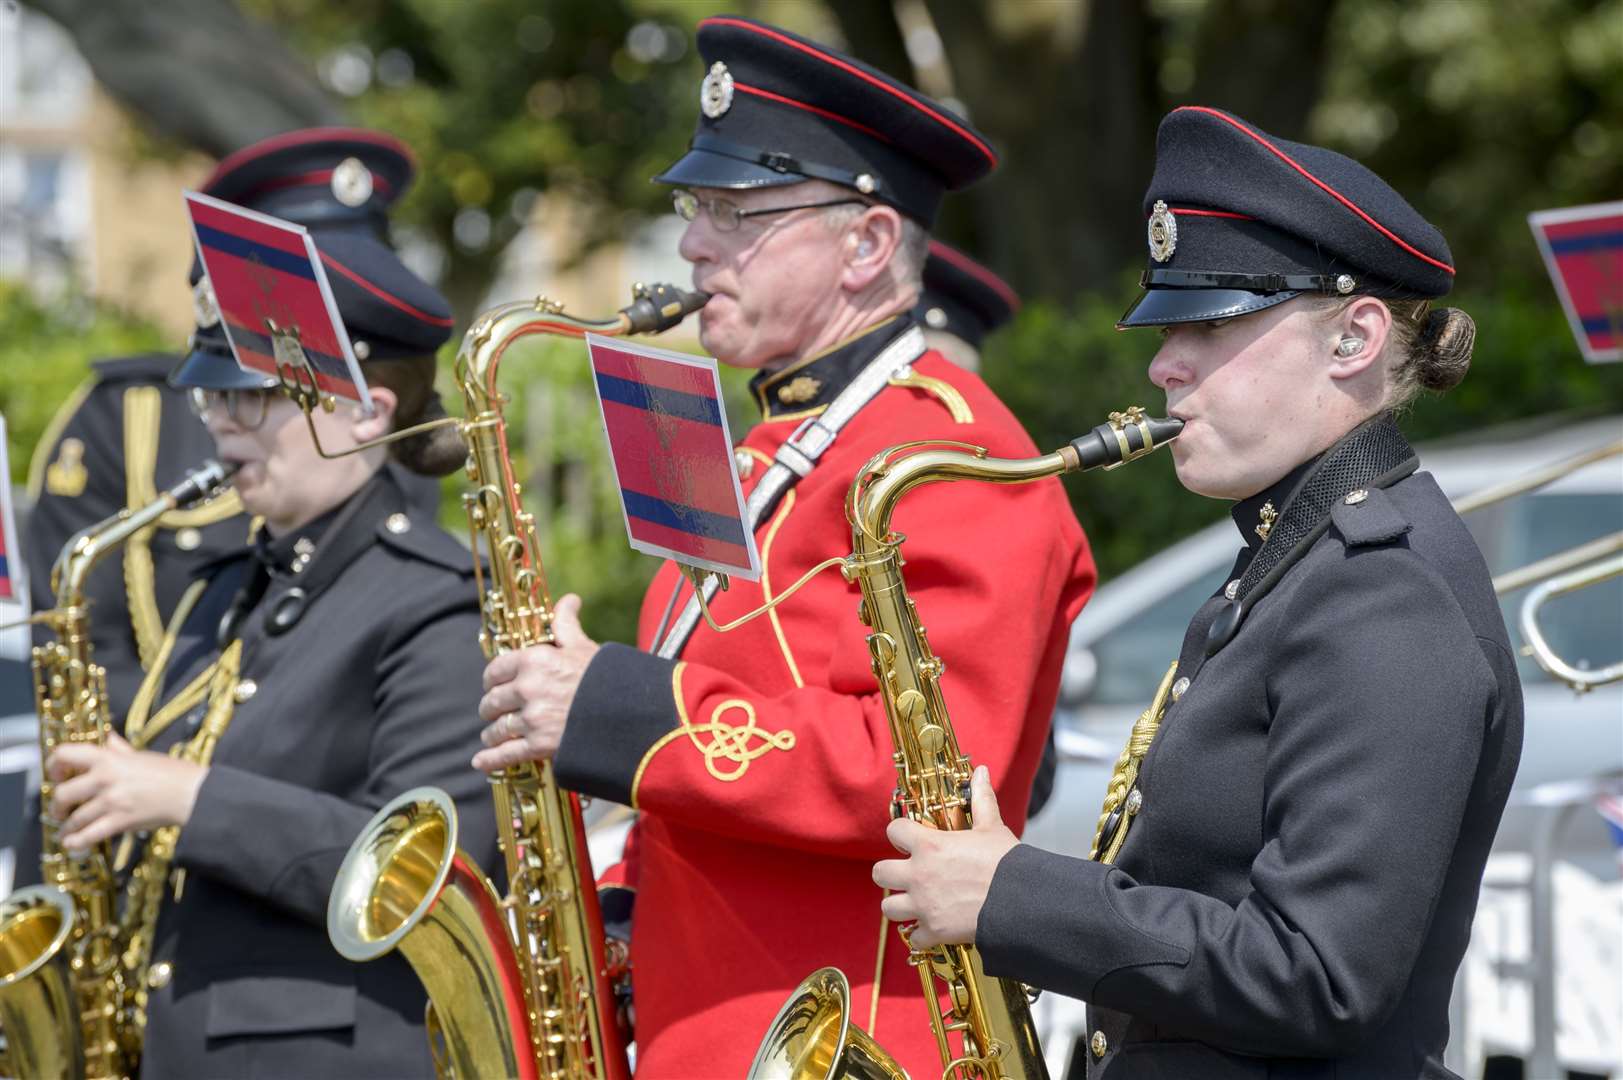 Lots of events will include live music and military bands